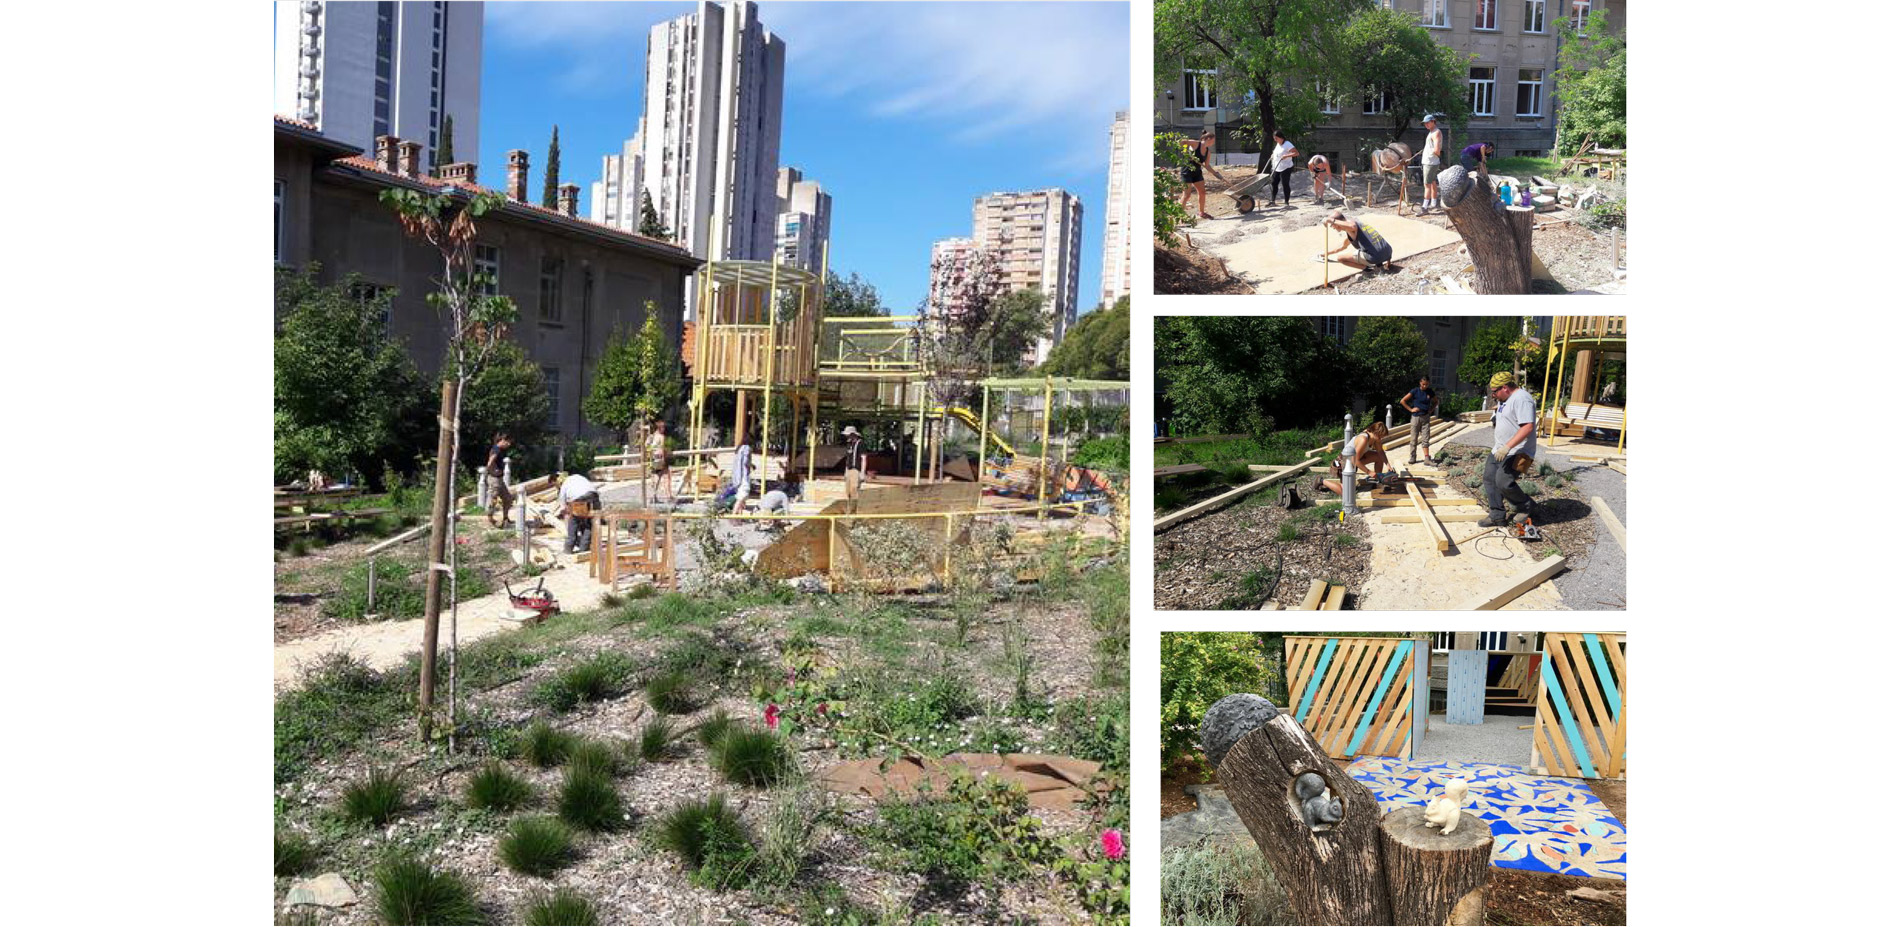 The design and construction of the garden’s second phase on the southern side of the main path was completed during 4 weeks of the following Summer in…